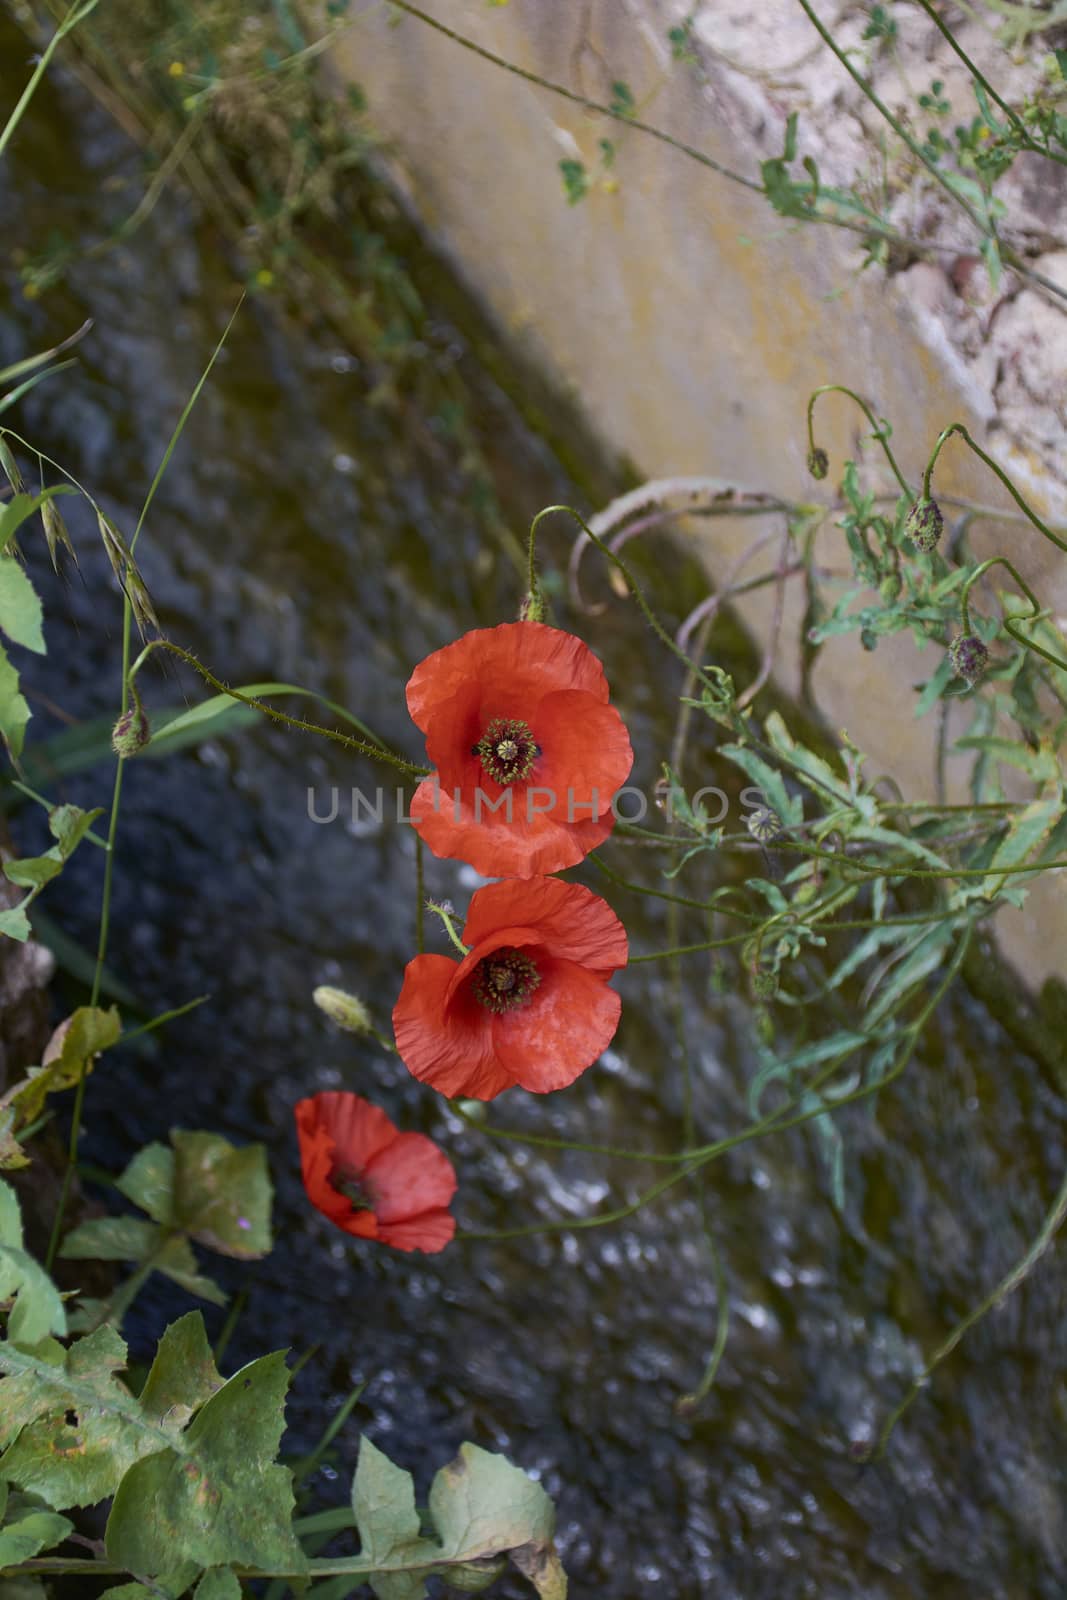 Three red poppies looking at the warm spring. Colors of nature